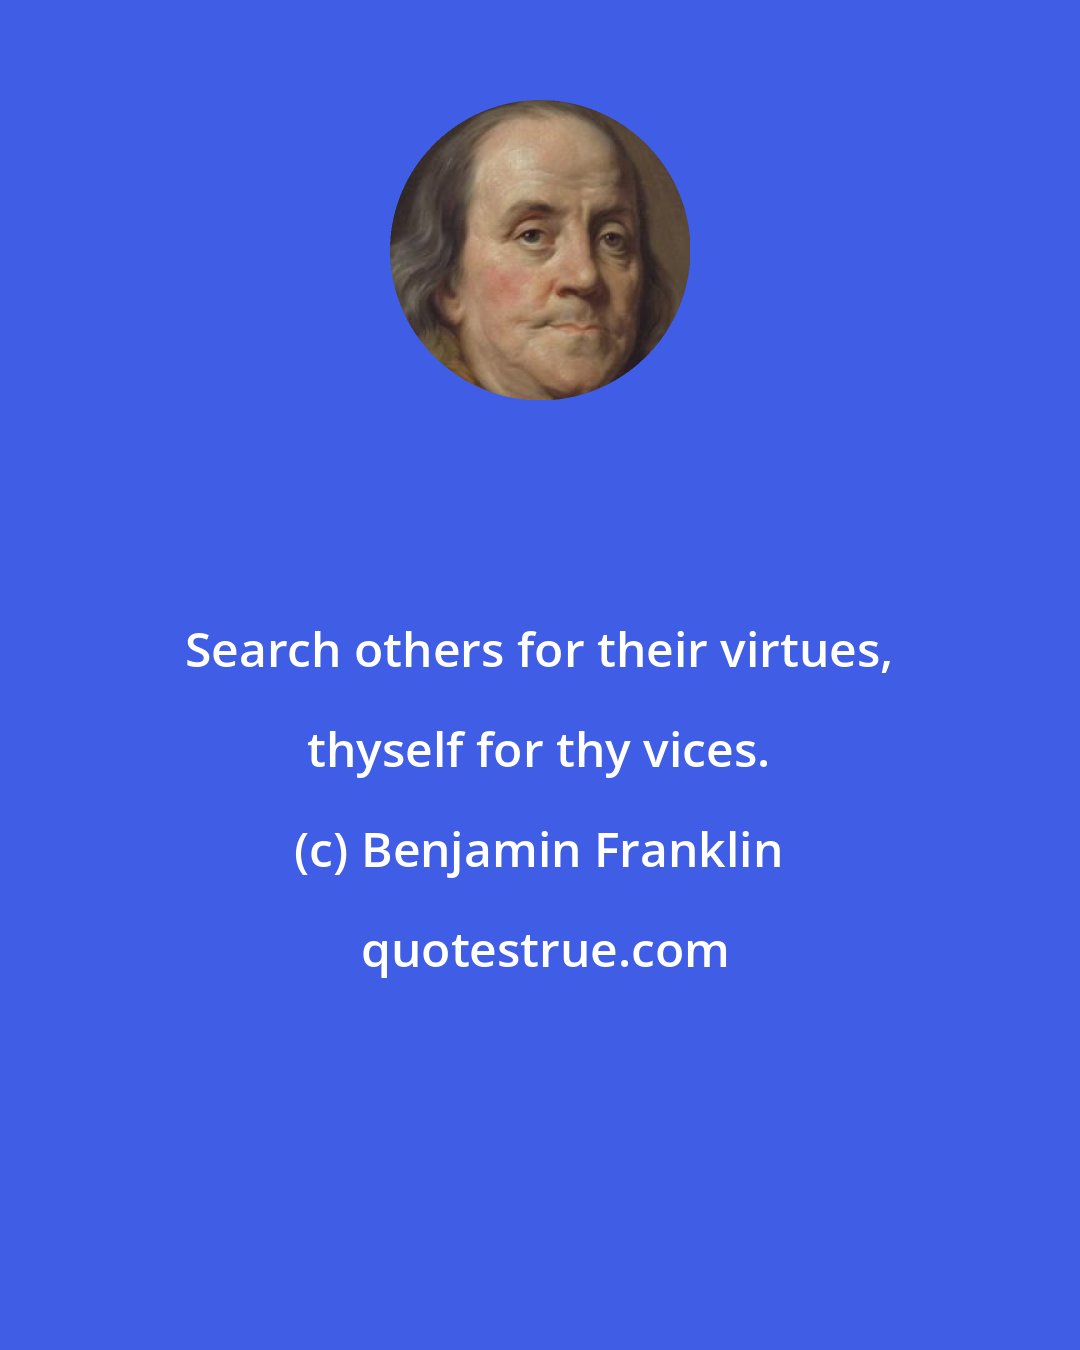 Benjamin Franklin: Search others for their virtues, thyself for thy vices.